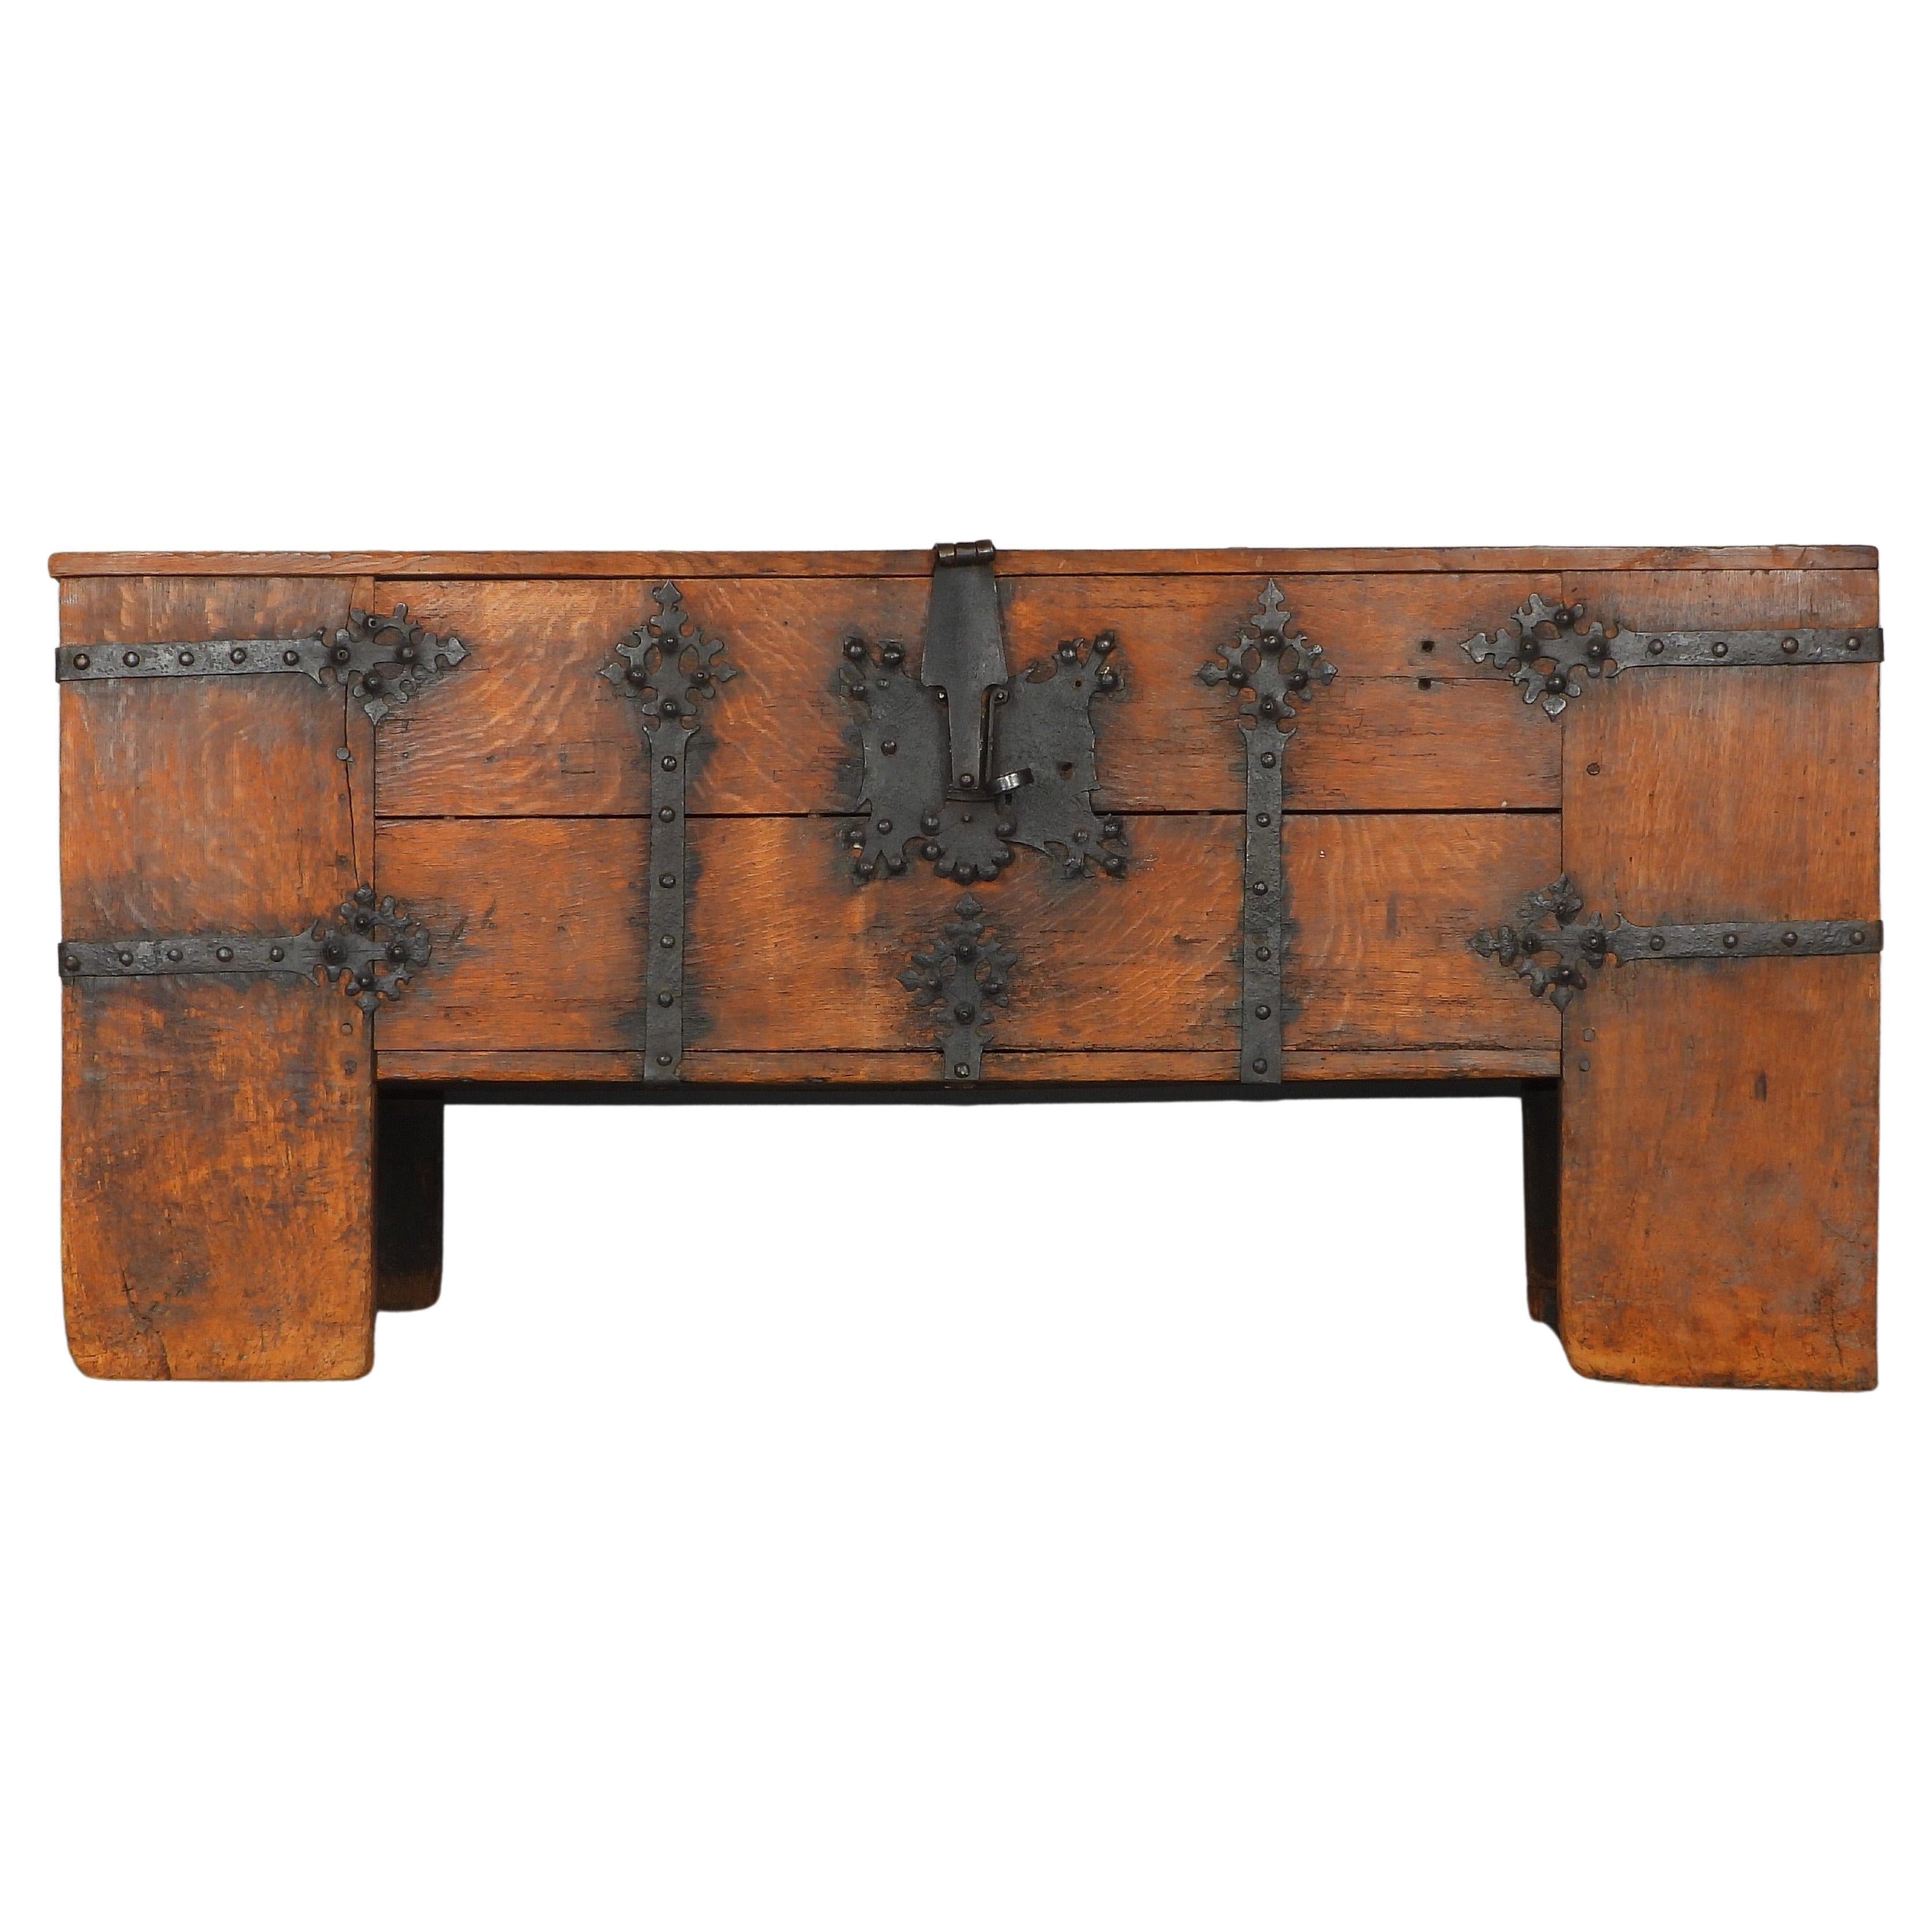 Rare Late Medieval 16th Century German Wrought Iron Oak Chest